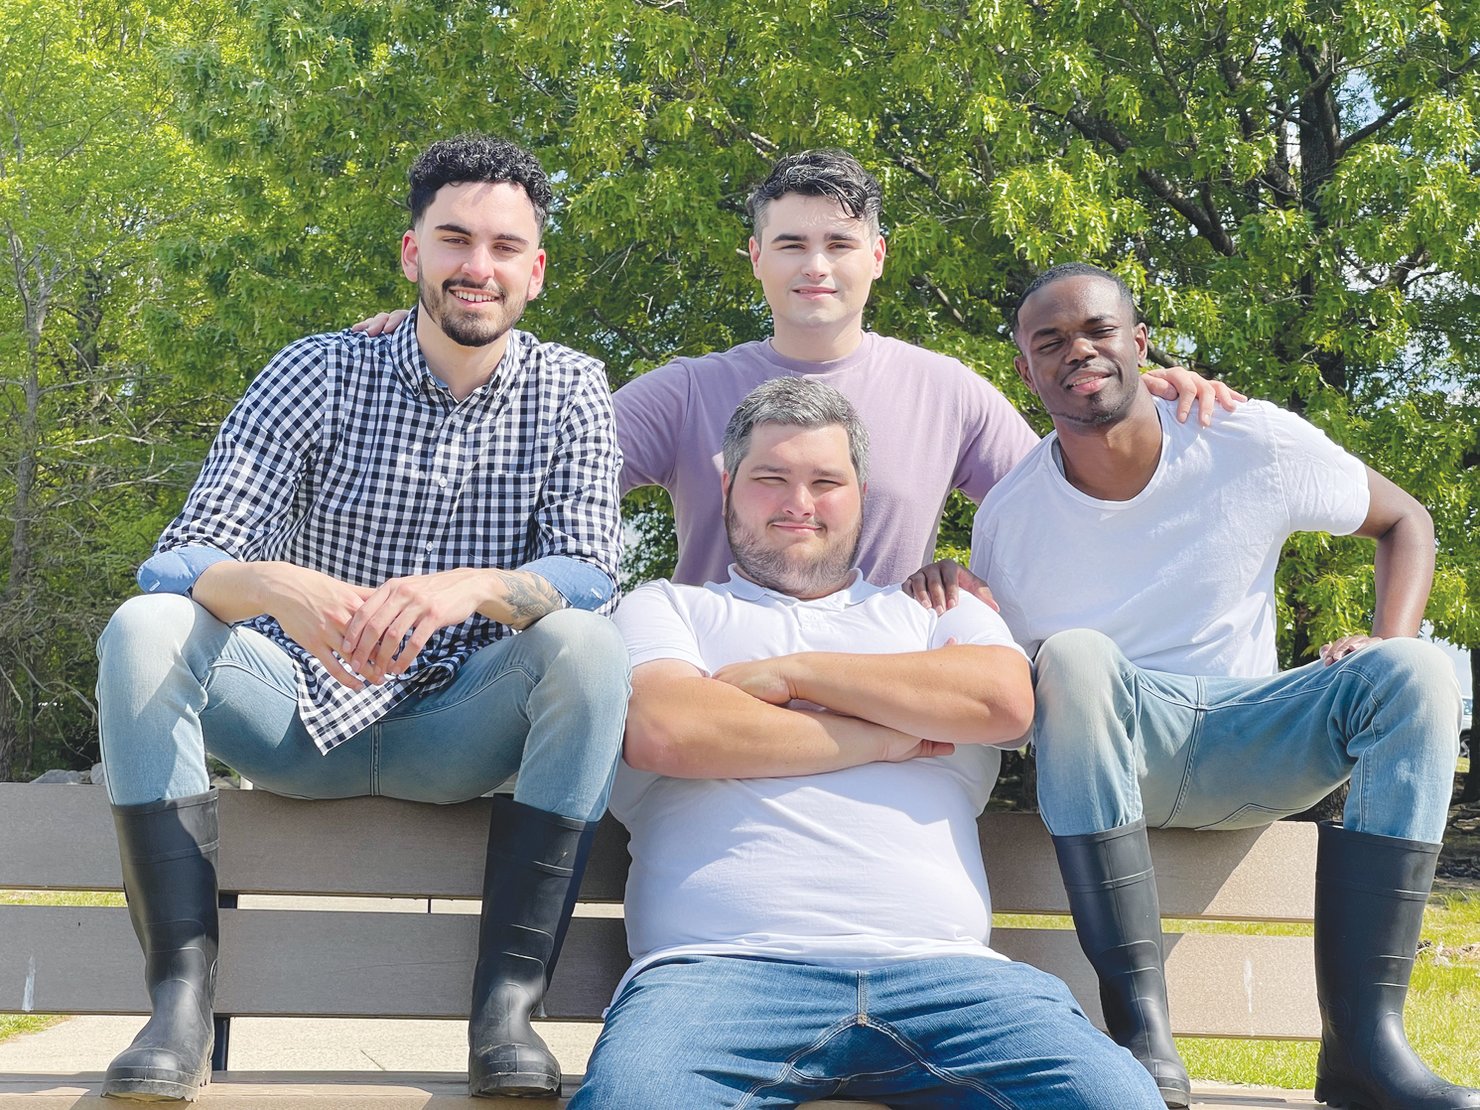 The 'Unity 2022' candidates seeking office in Siler City include, from left, Nick Gallardo, Dean Picot II (sitting), Jared Picot and Samuel Williams.